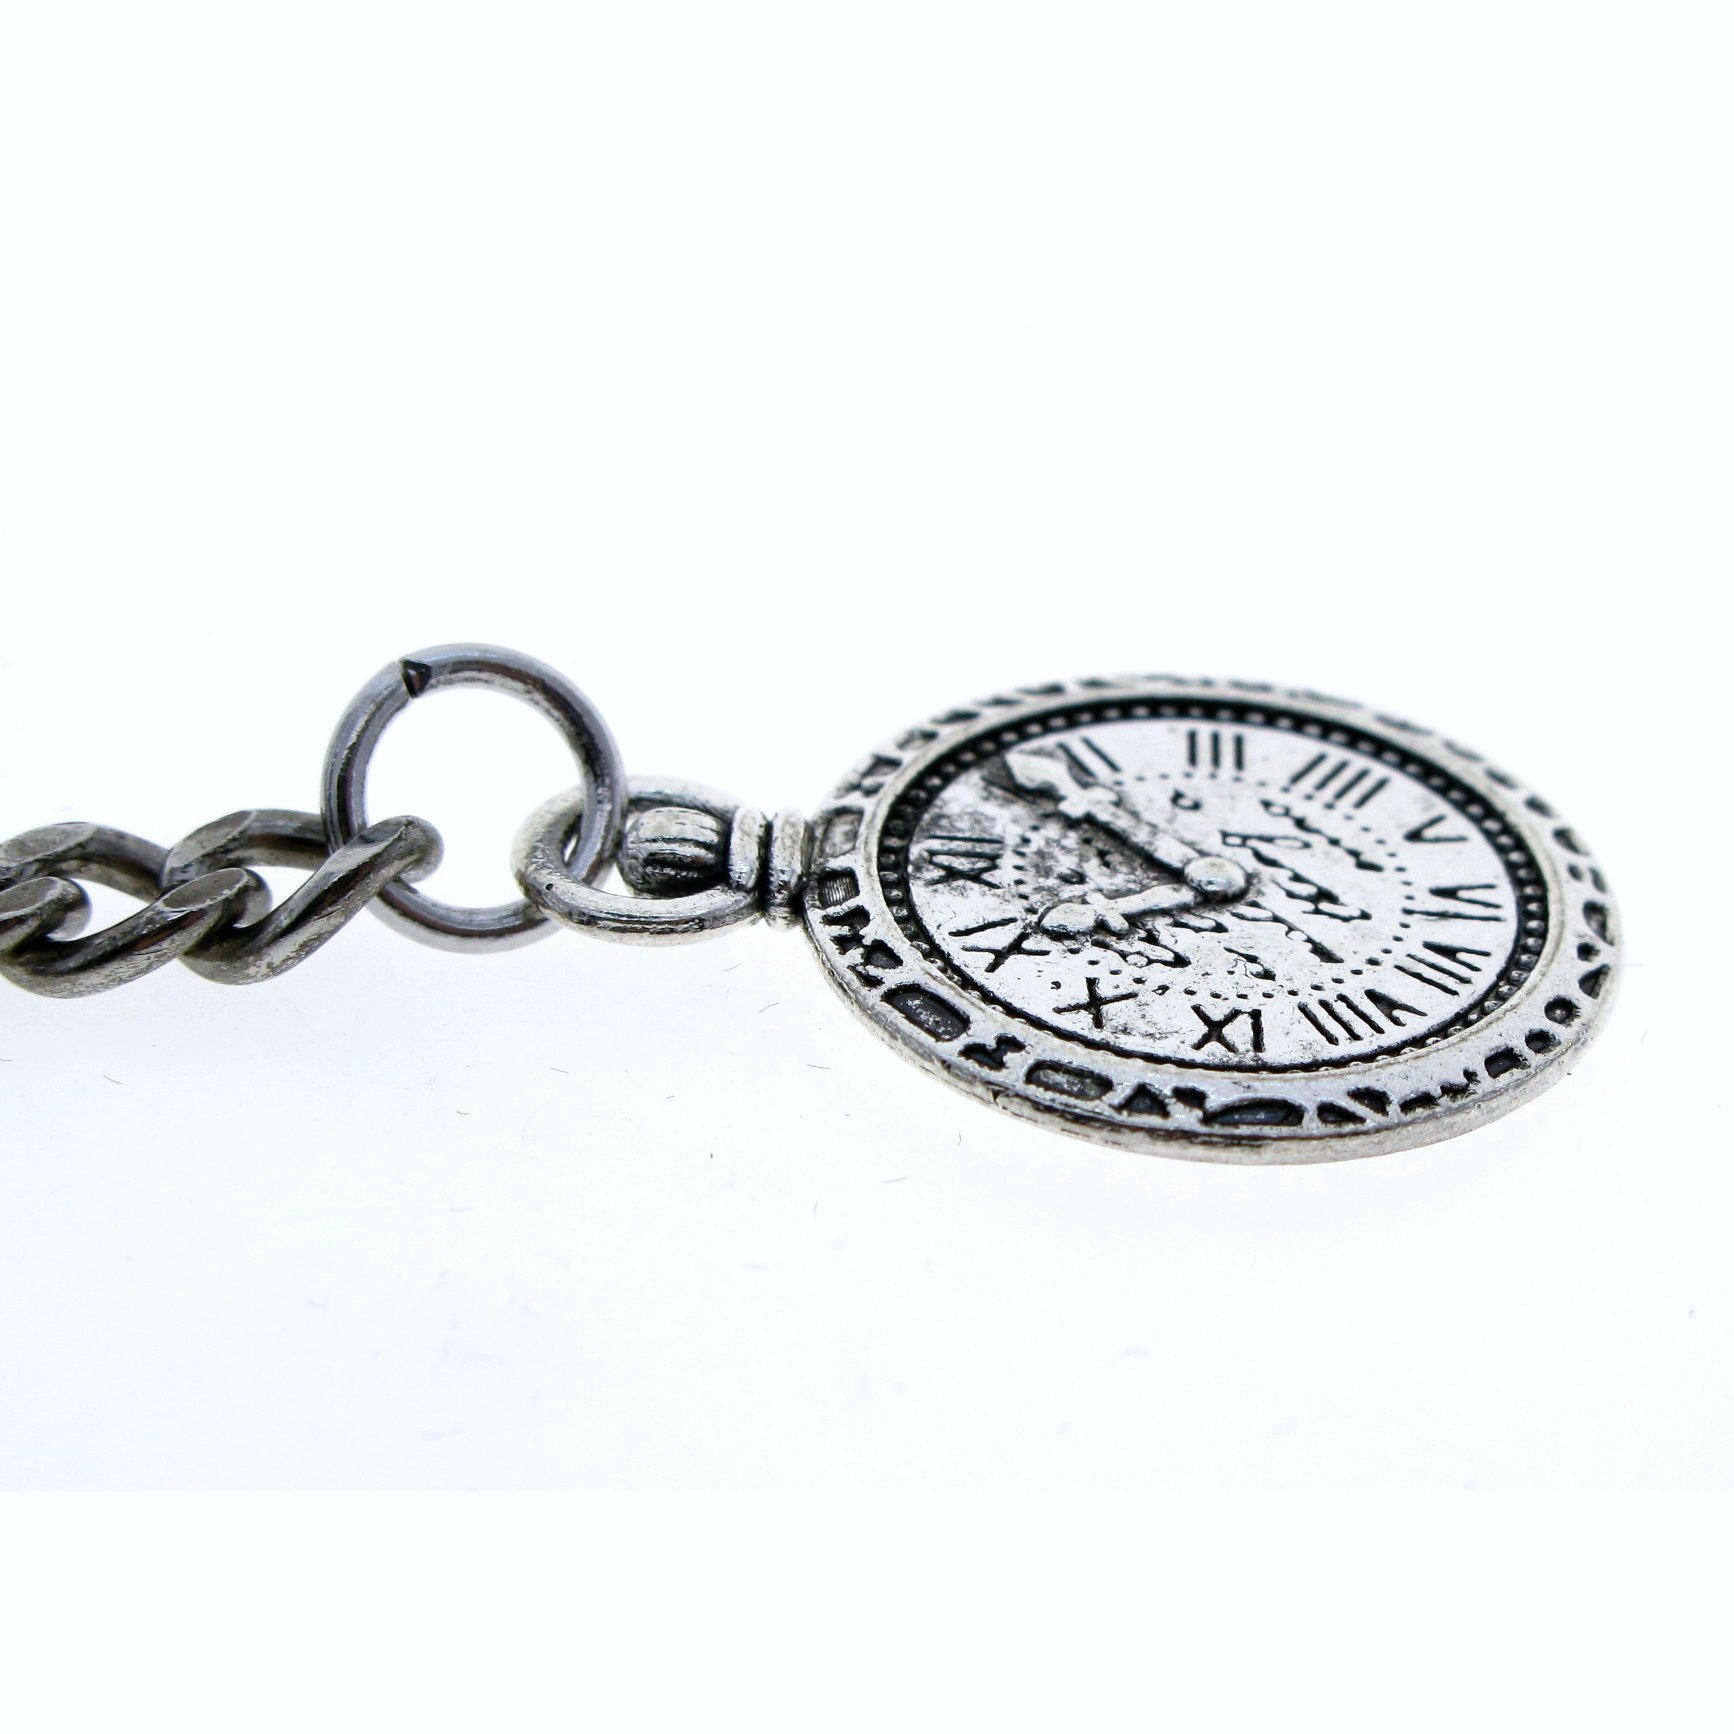 Albert Chain Silver Color Pocket Watch Chains for Men with Mini Pocket Watch Design Fob T Bar AC36